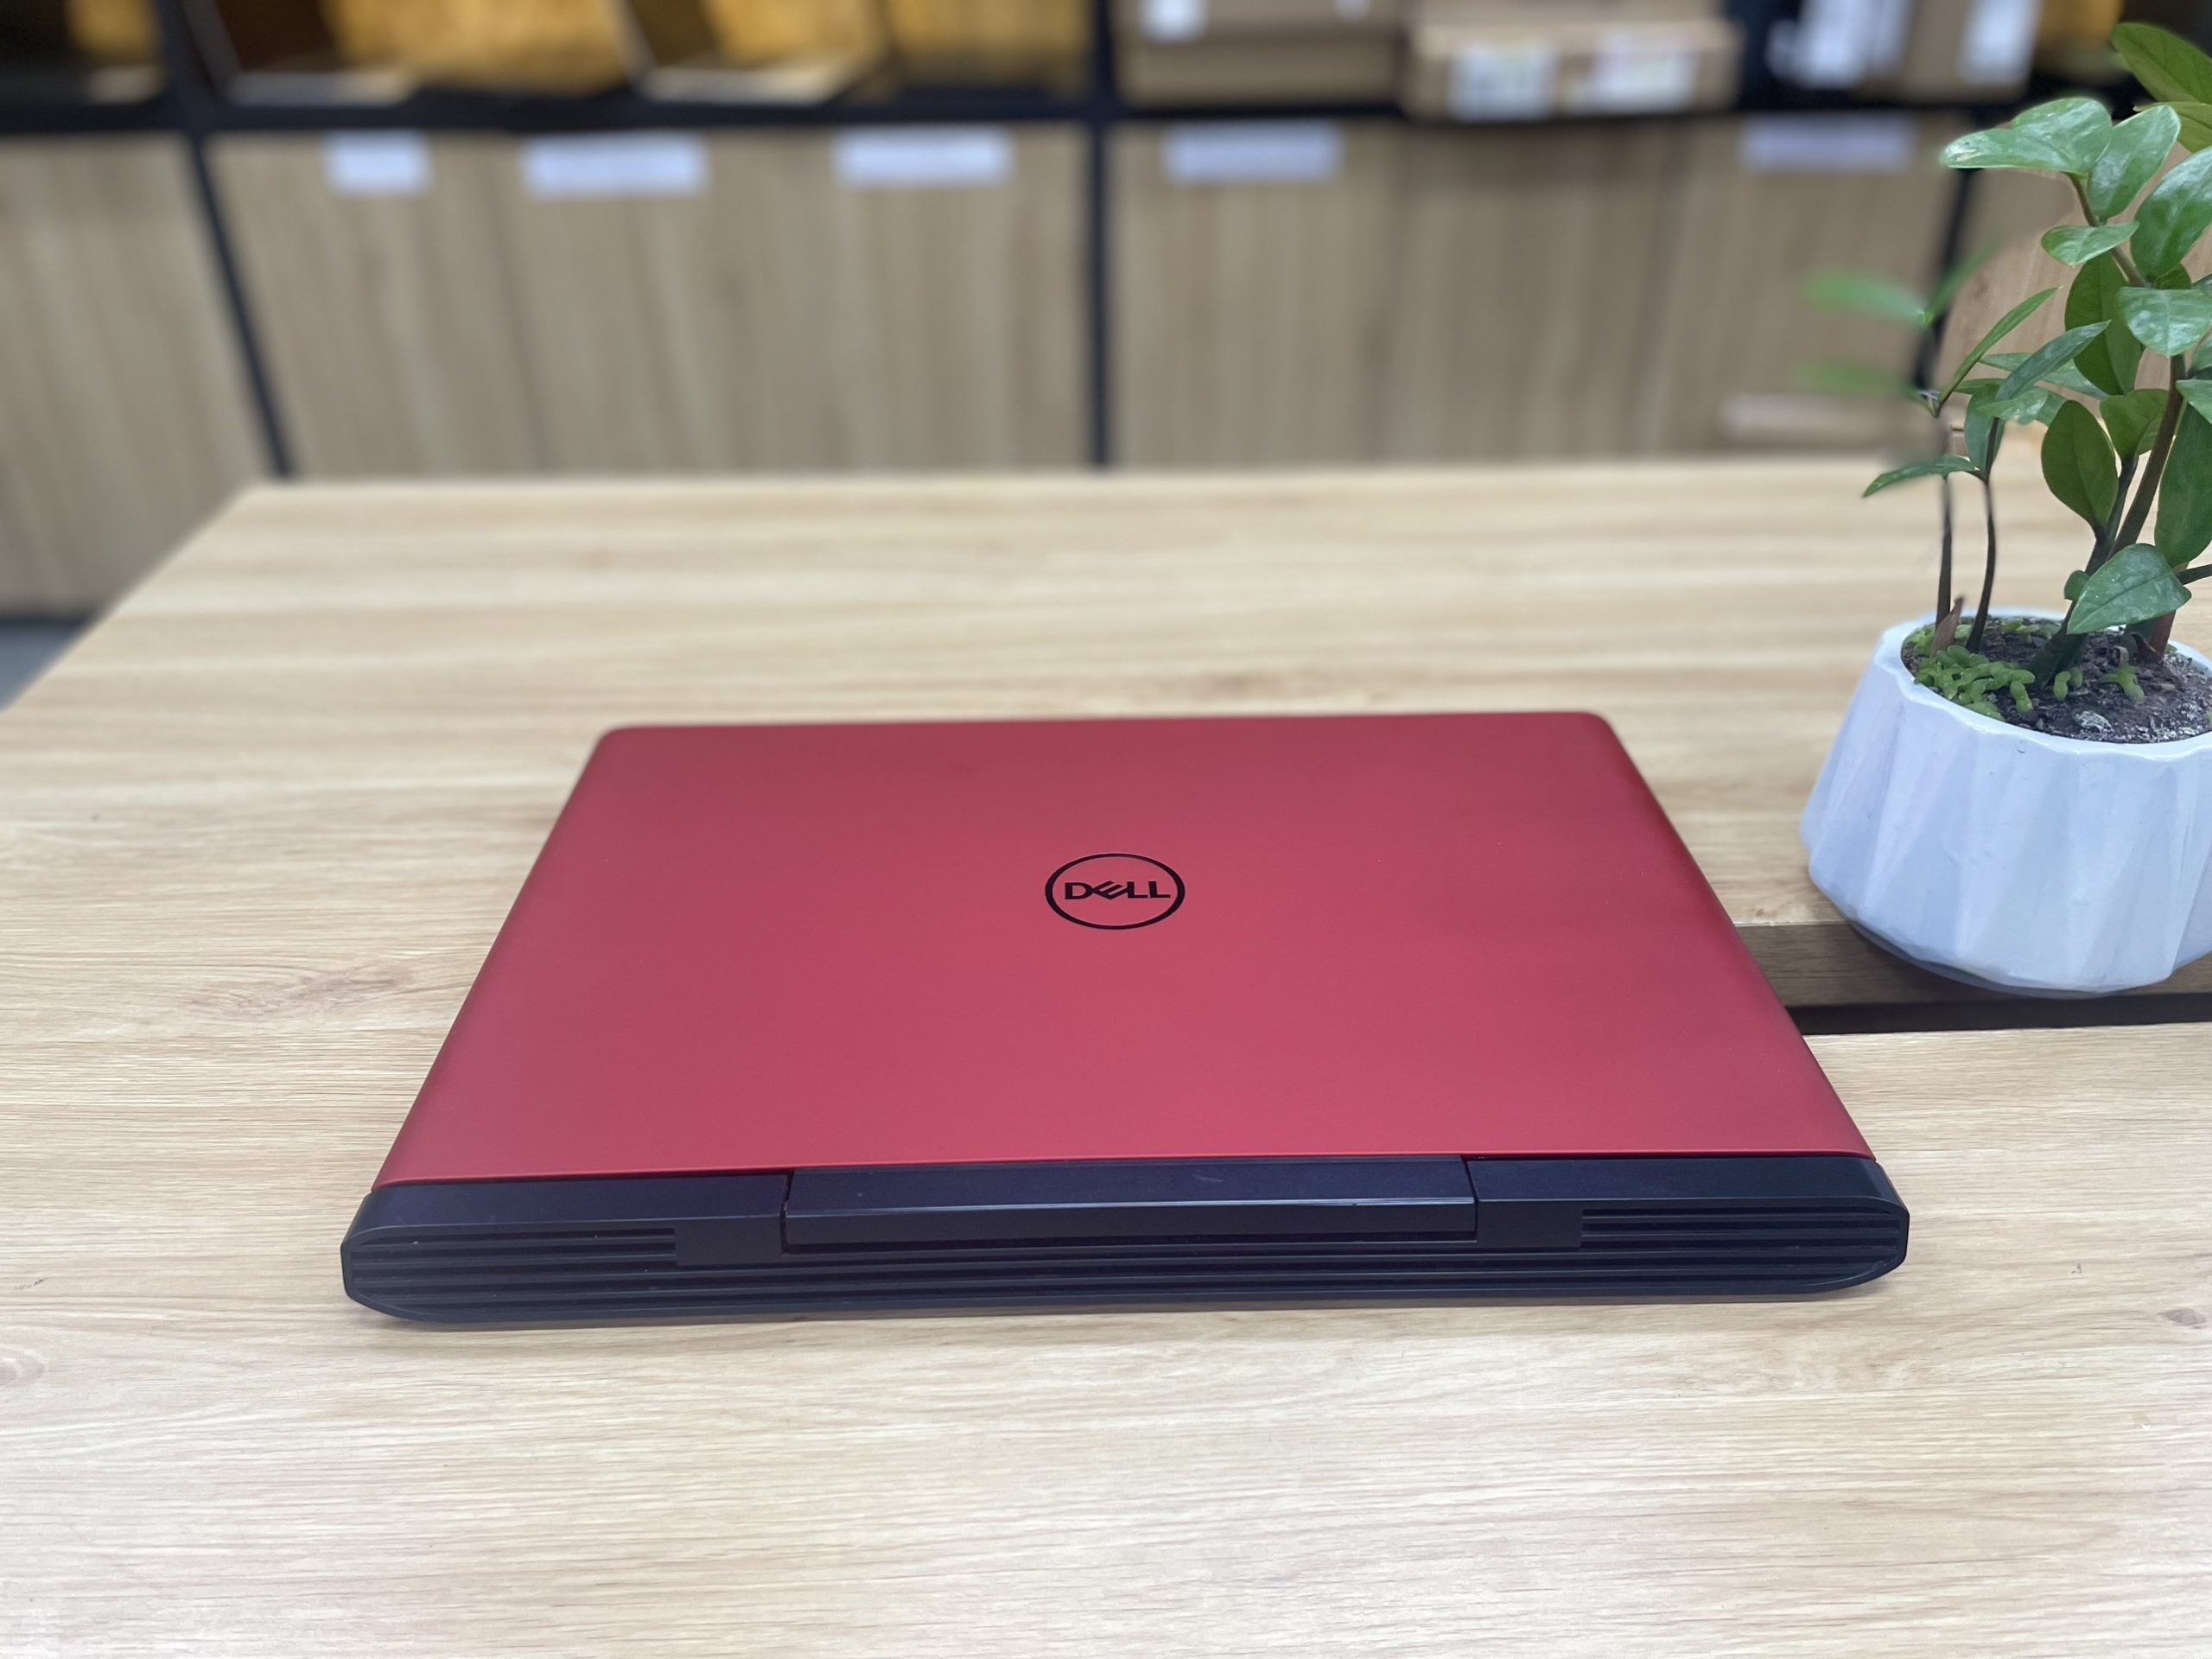 LAPTOP DELL GAMING INSPIRON 7577 I5